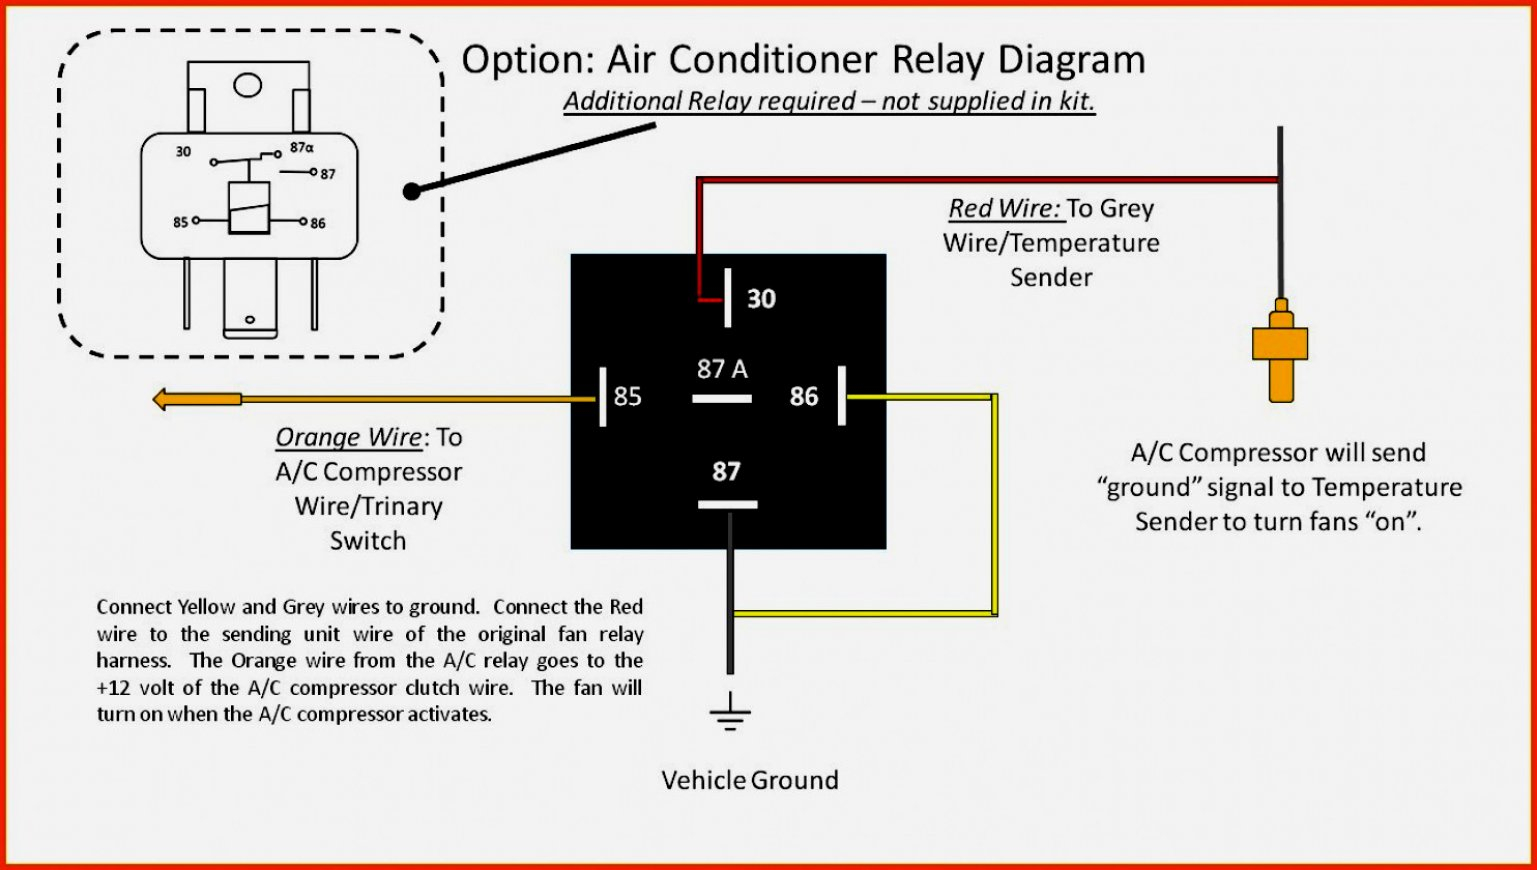 Furnace Blower Relay Diagram - Wiring Diagram Explained - 12 Volt Relay Wiring Diagram